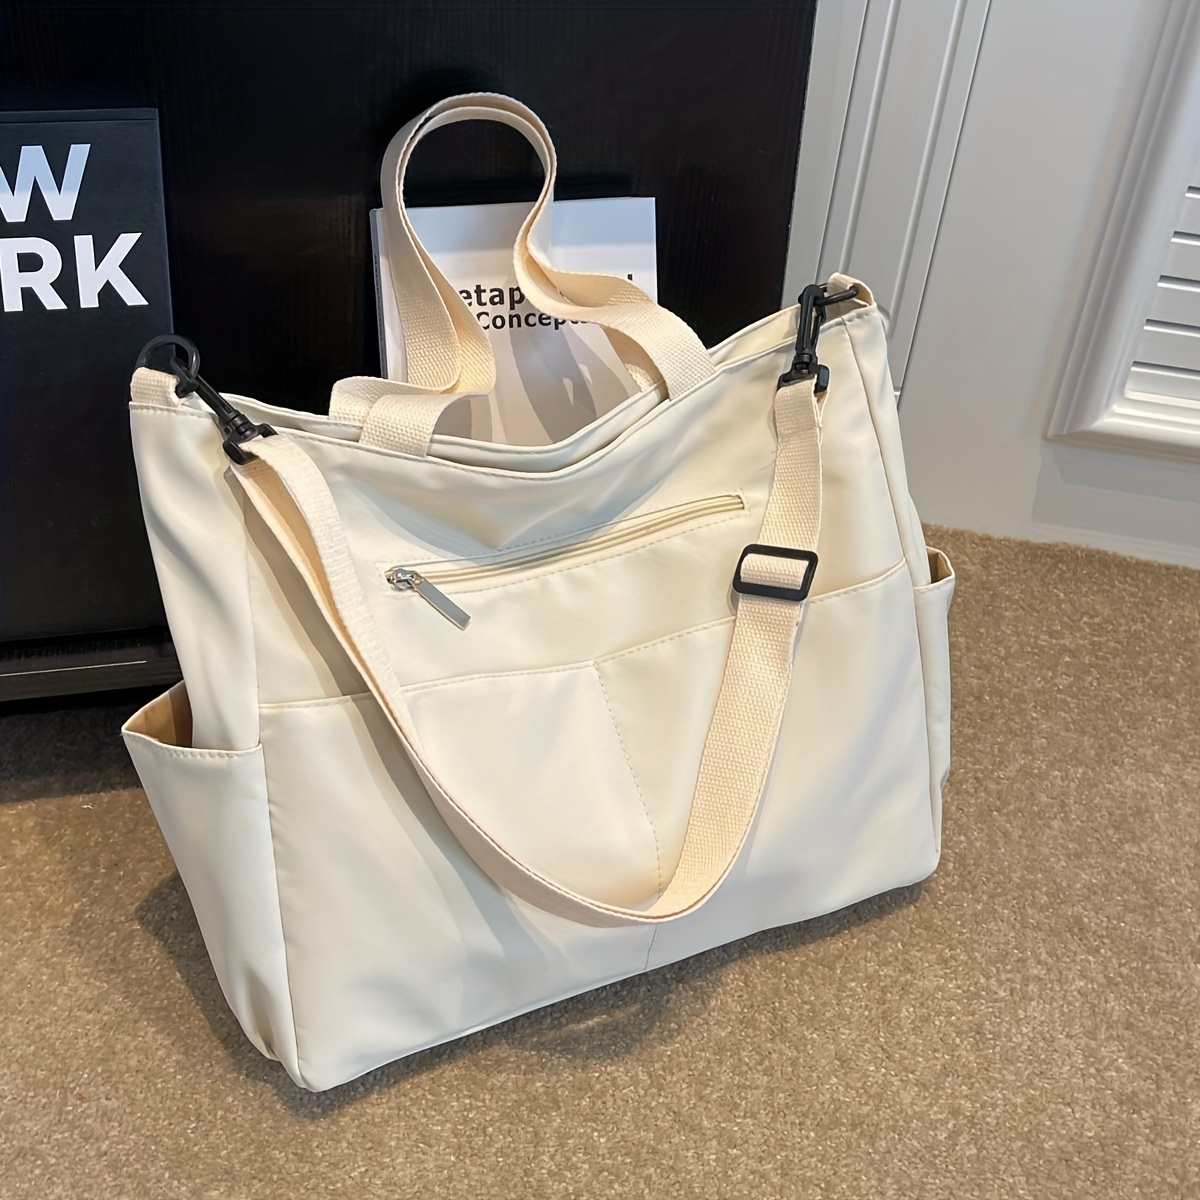 Large Capacity Nylon Tote Bag For Commute With Unique Design Casual  Simplicity-concise Yet Fashionable. Sling/shoulder Handbag Or Boston Bag  Use